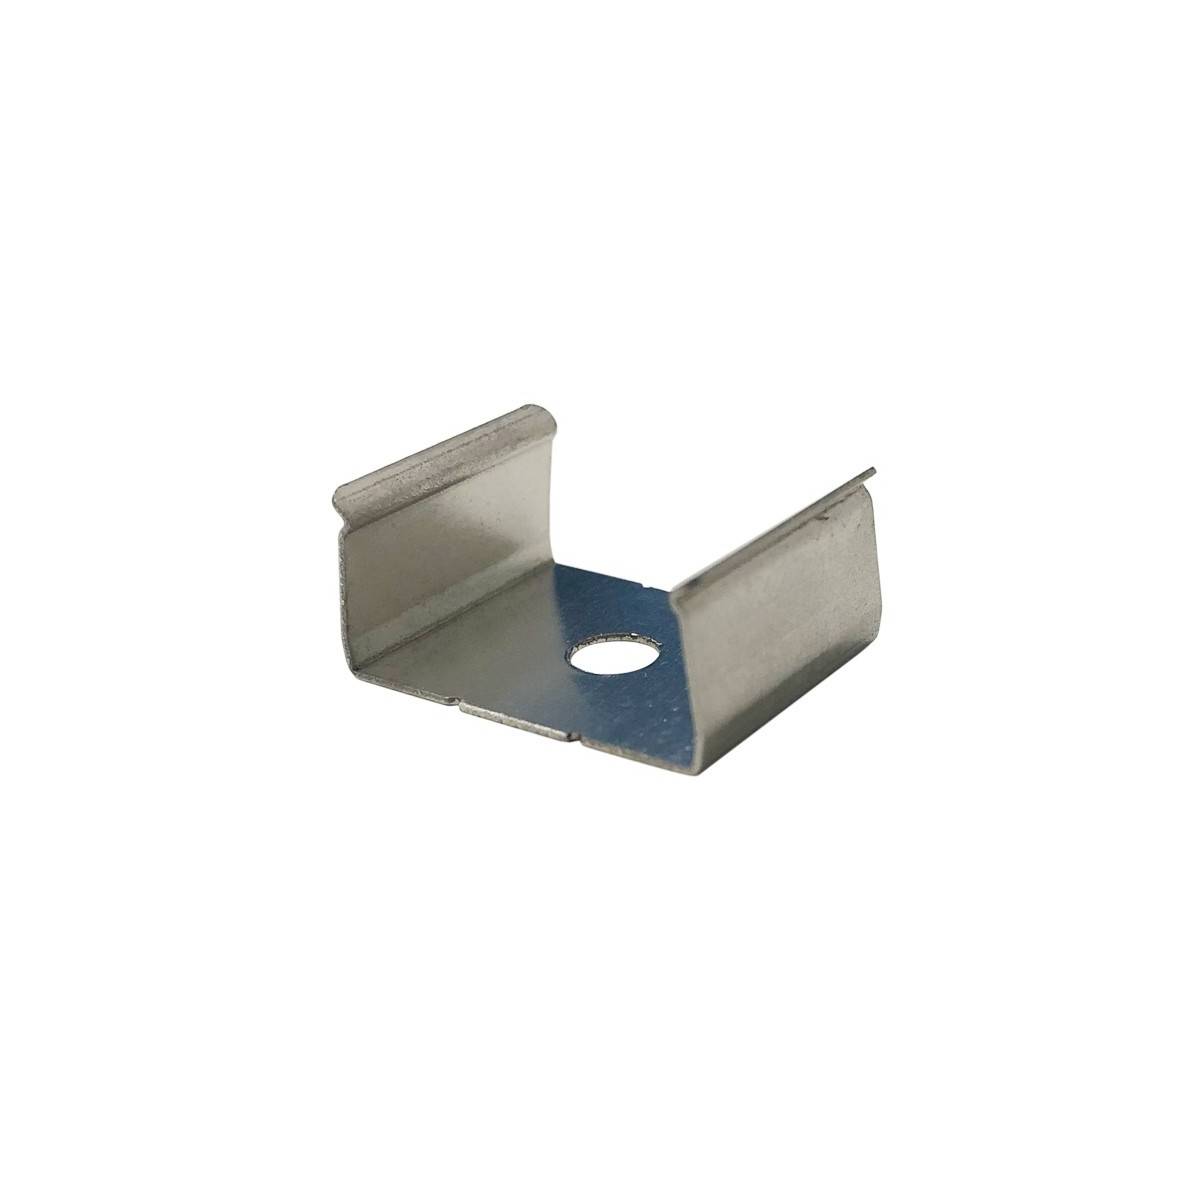 Metal clamp for fastening profiles 18x12mm (1pc)